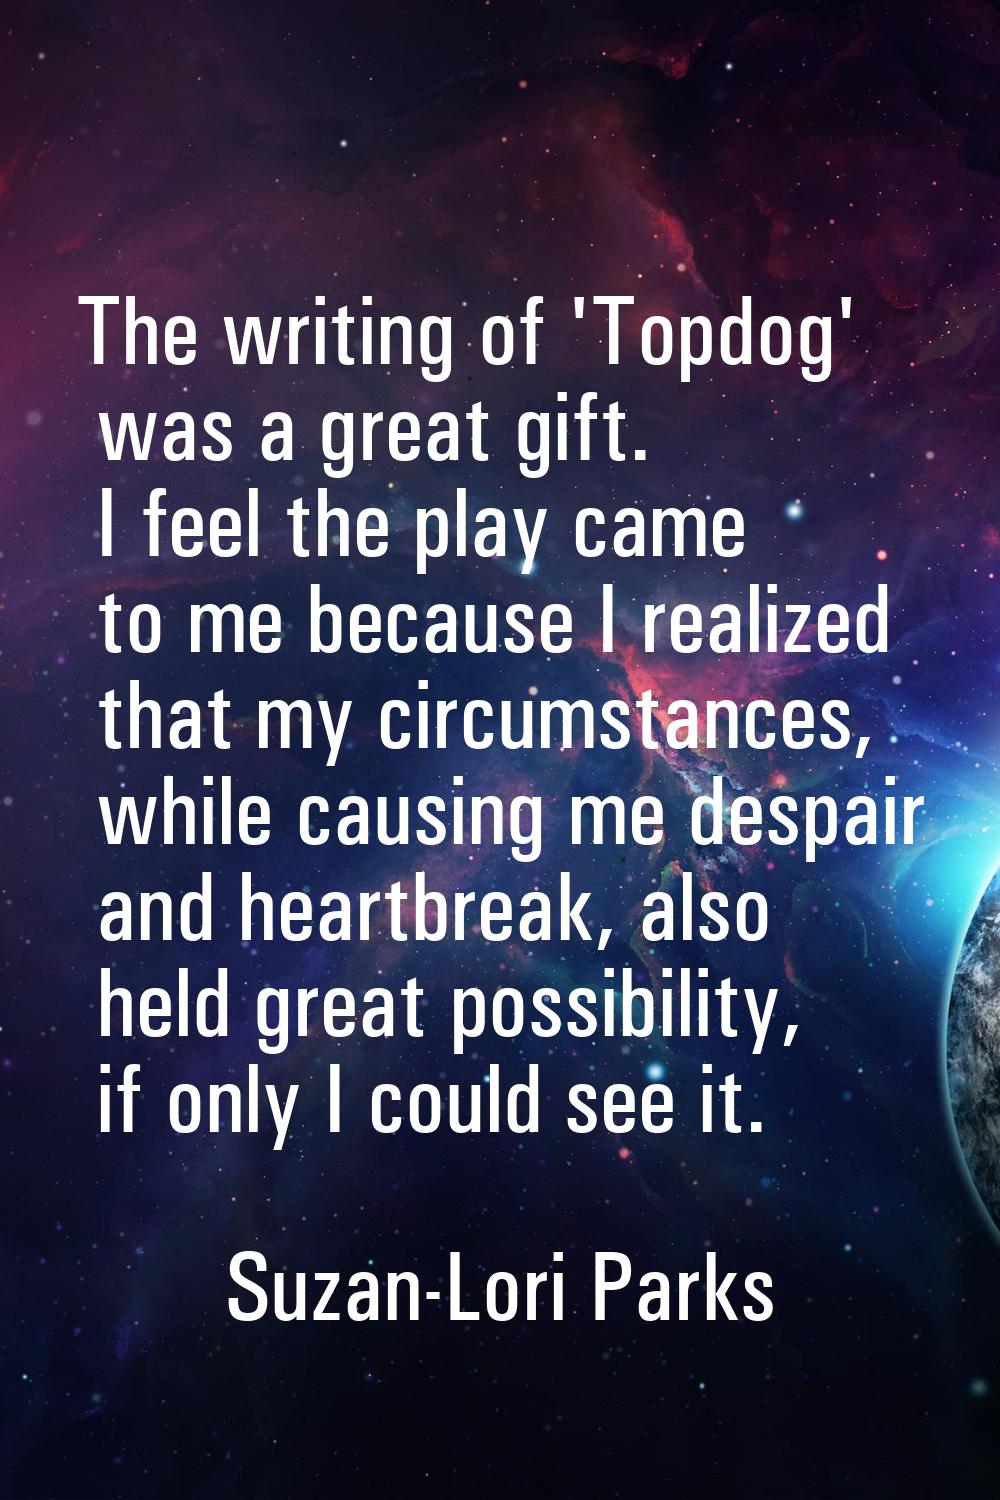 The writing of 'Topdog' was a great gift. I feel the play came to me because I realized that my cir